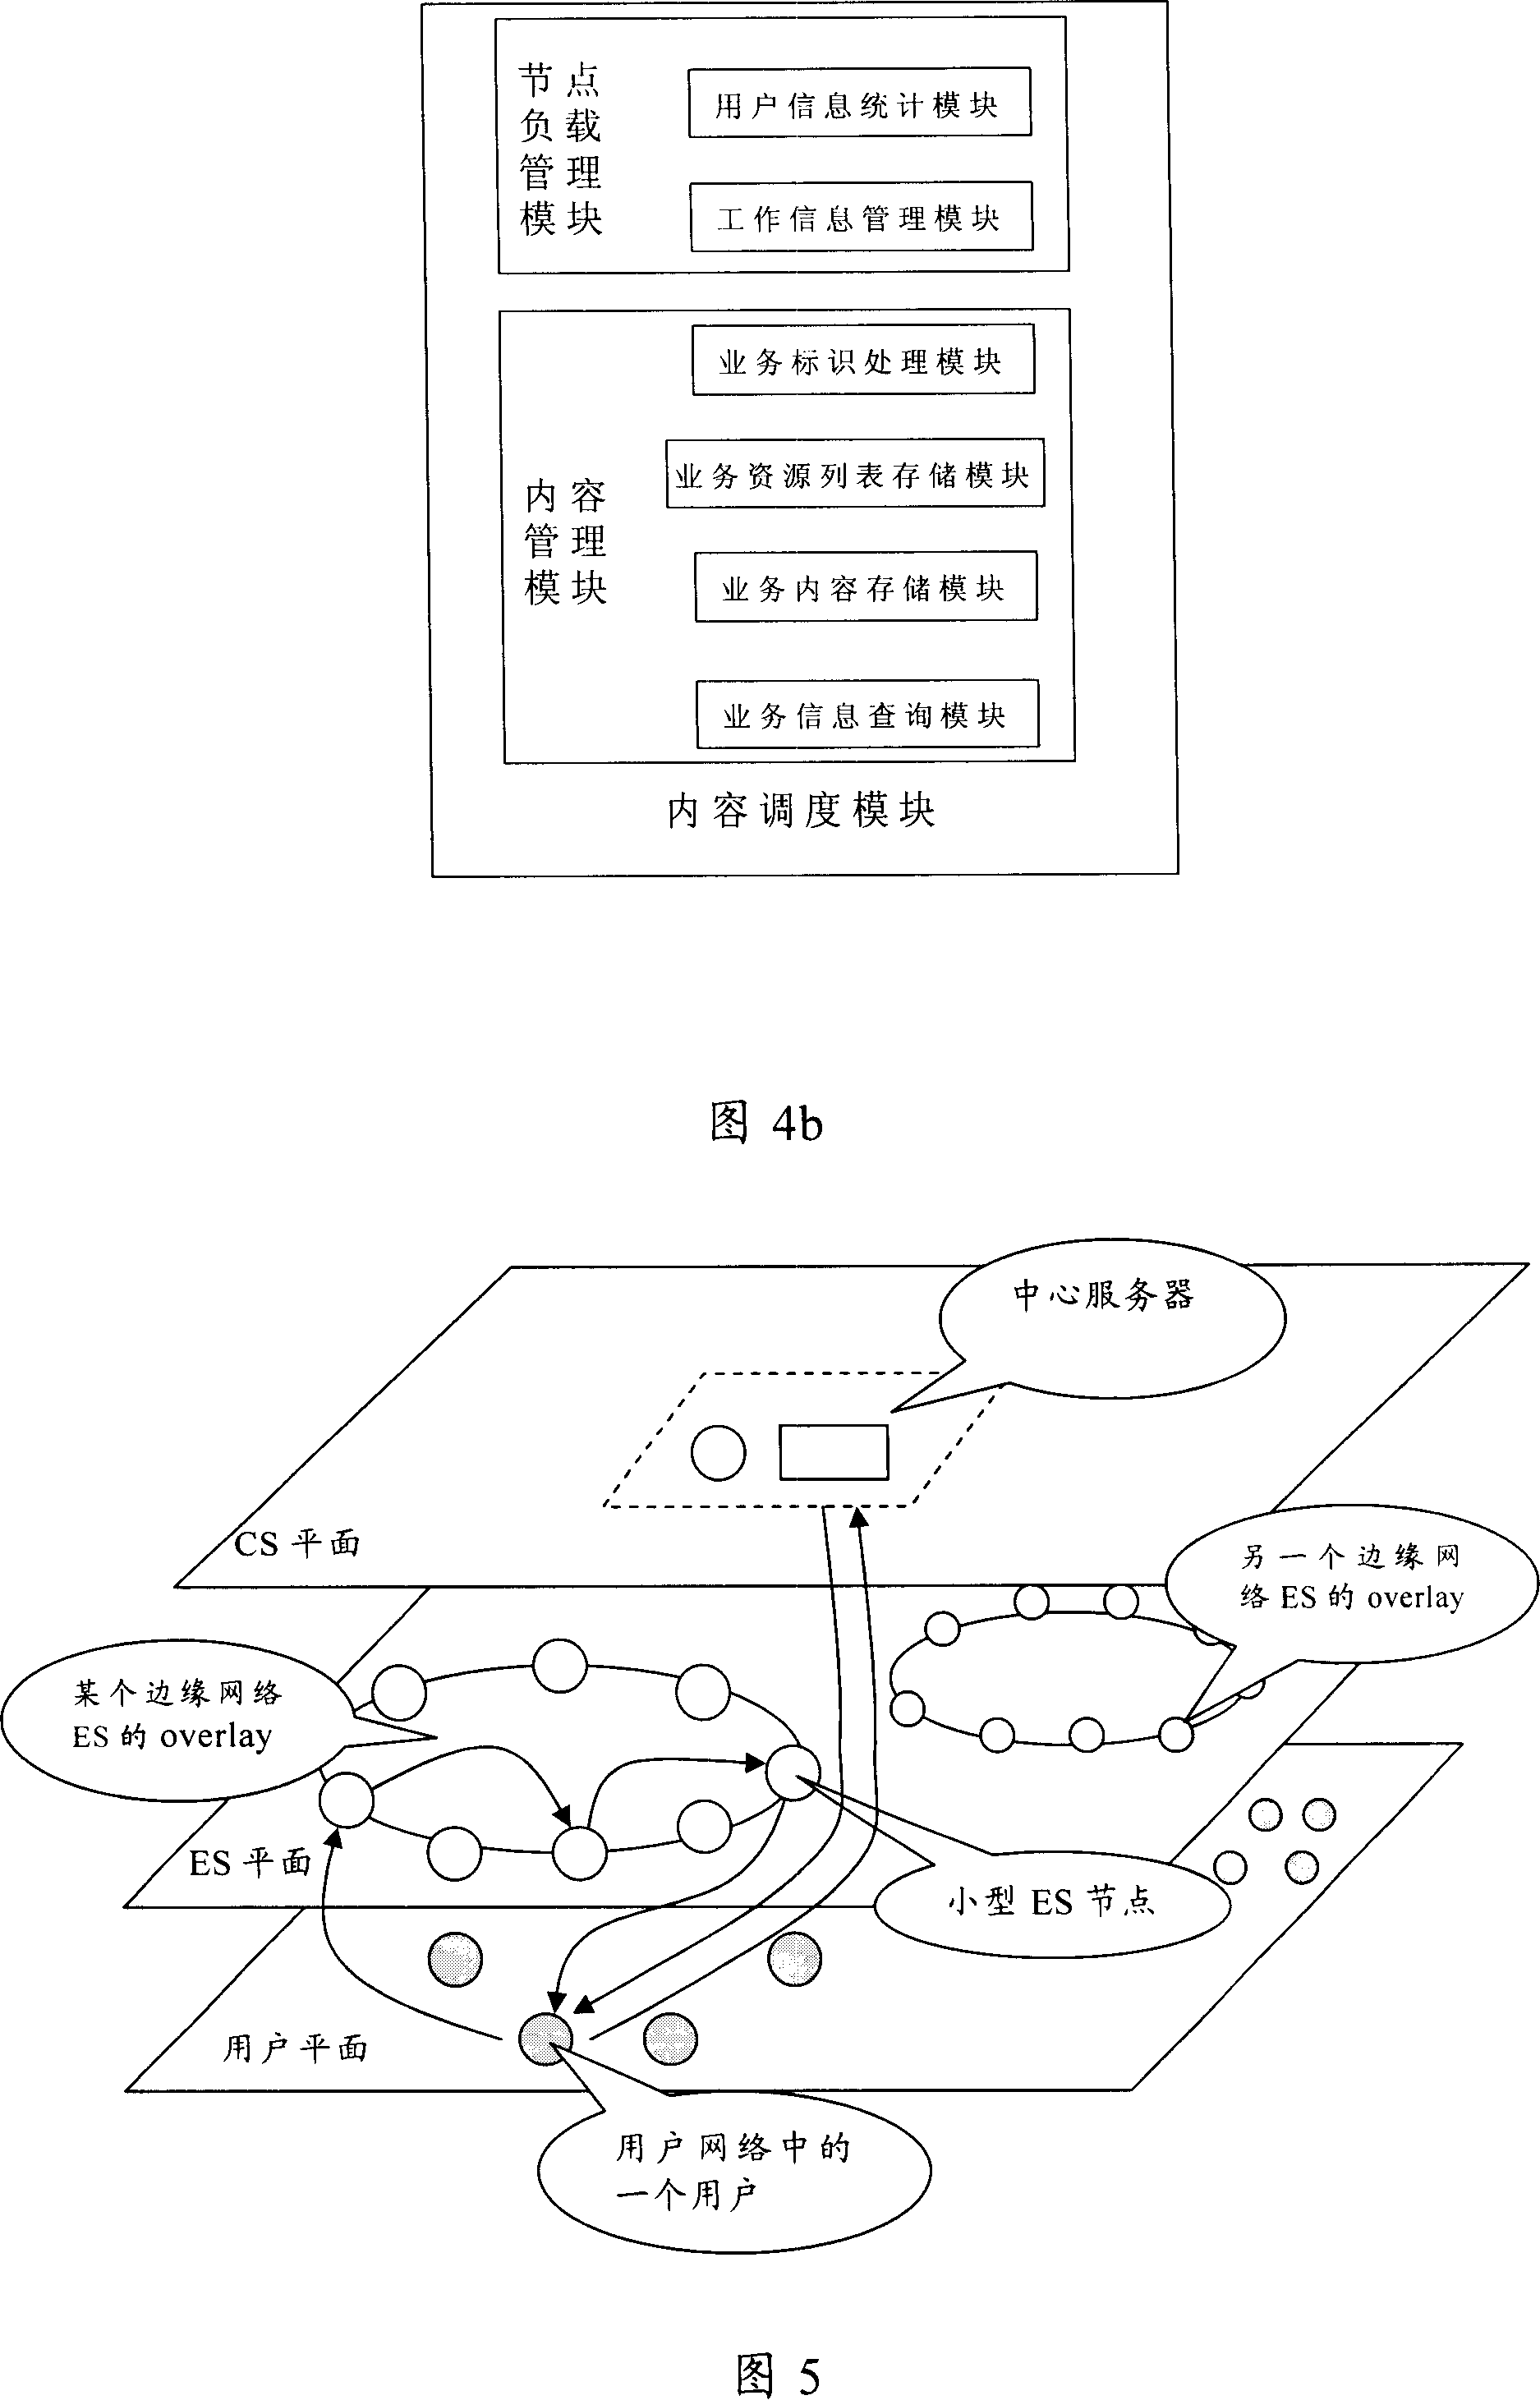 A distributed content distribution method, edge server and content distribution network